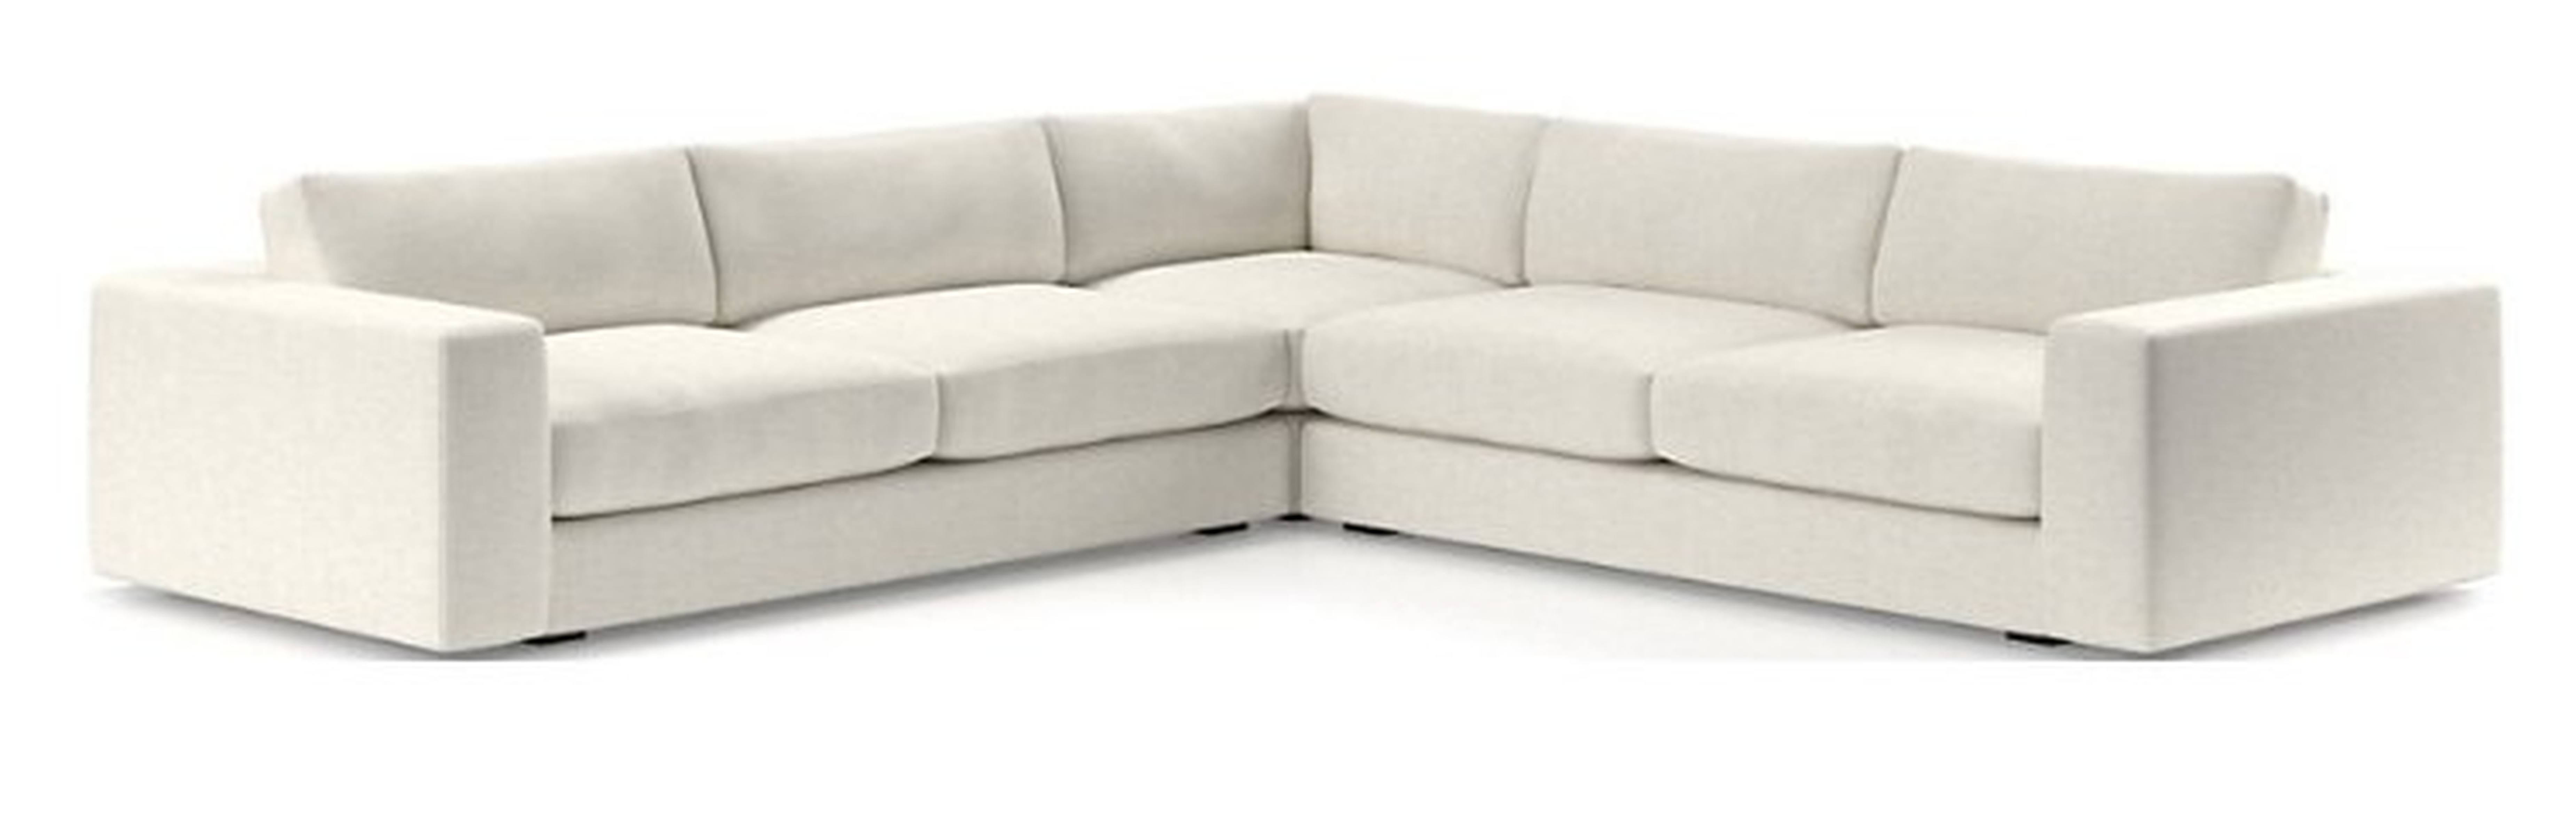 Oceanside 3-Piece Corner Sectional - Crate and Barrel